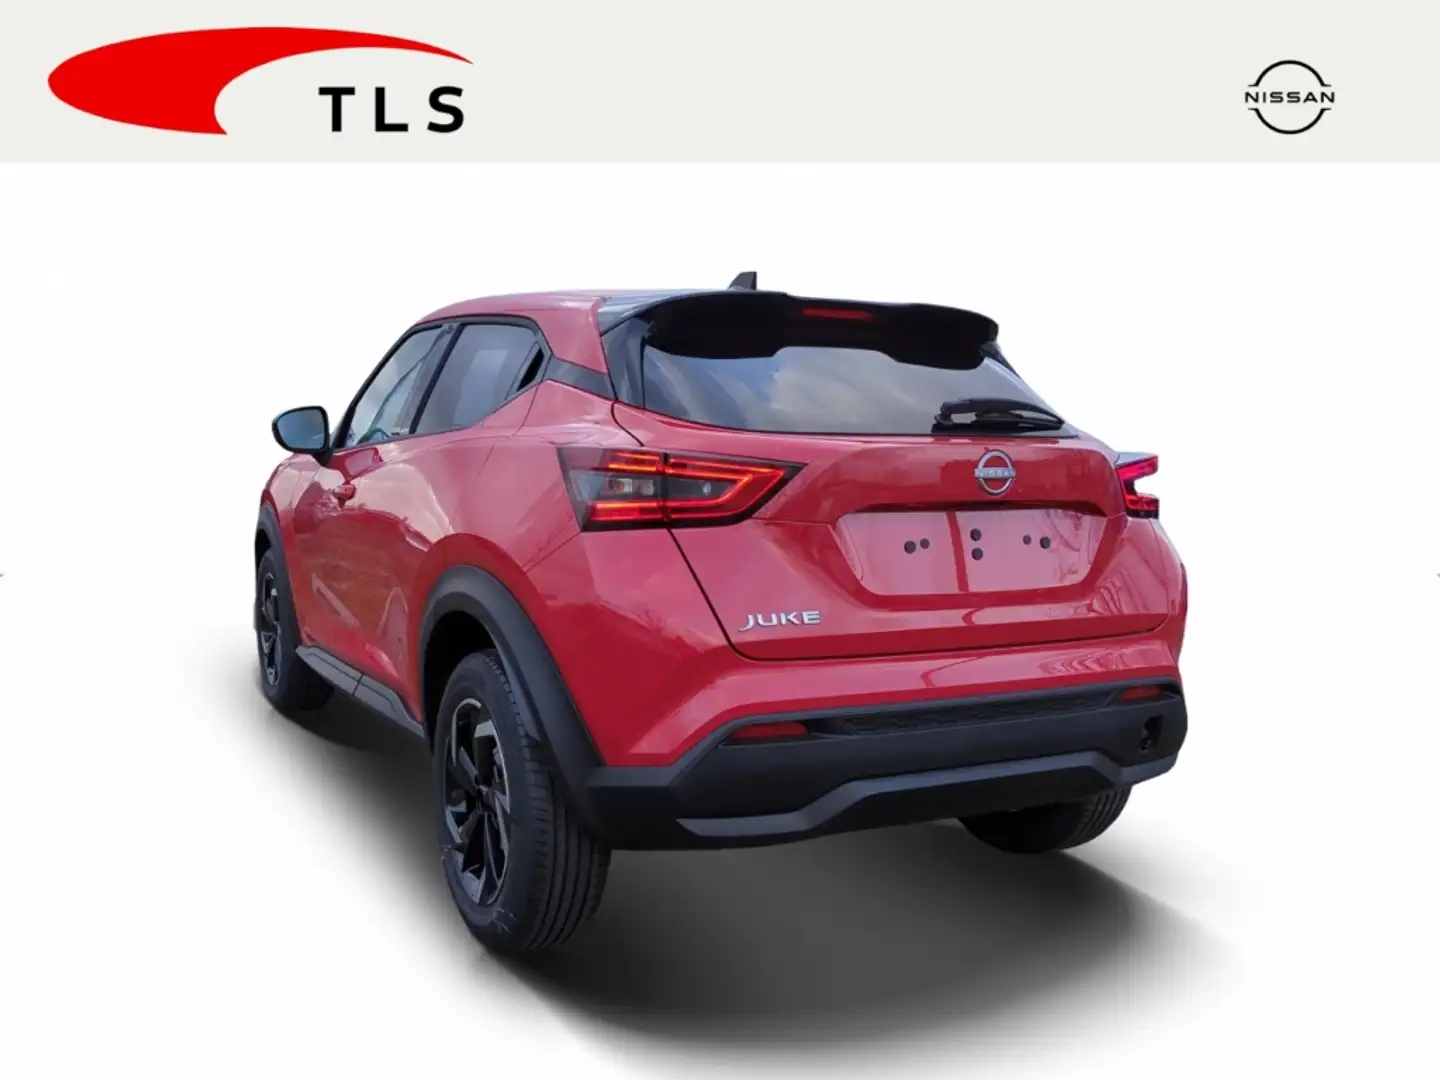 Nissan Juke N-STYLE - 1.0 DIG-T - 114PS - SOLID RED Czerwony - 2